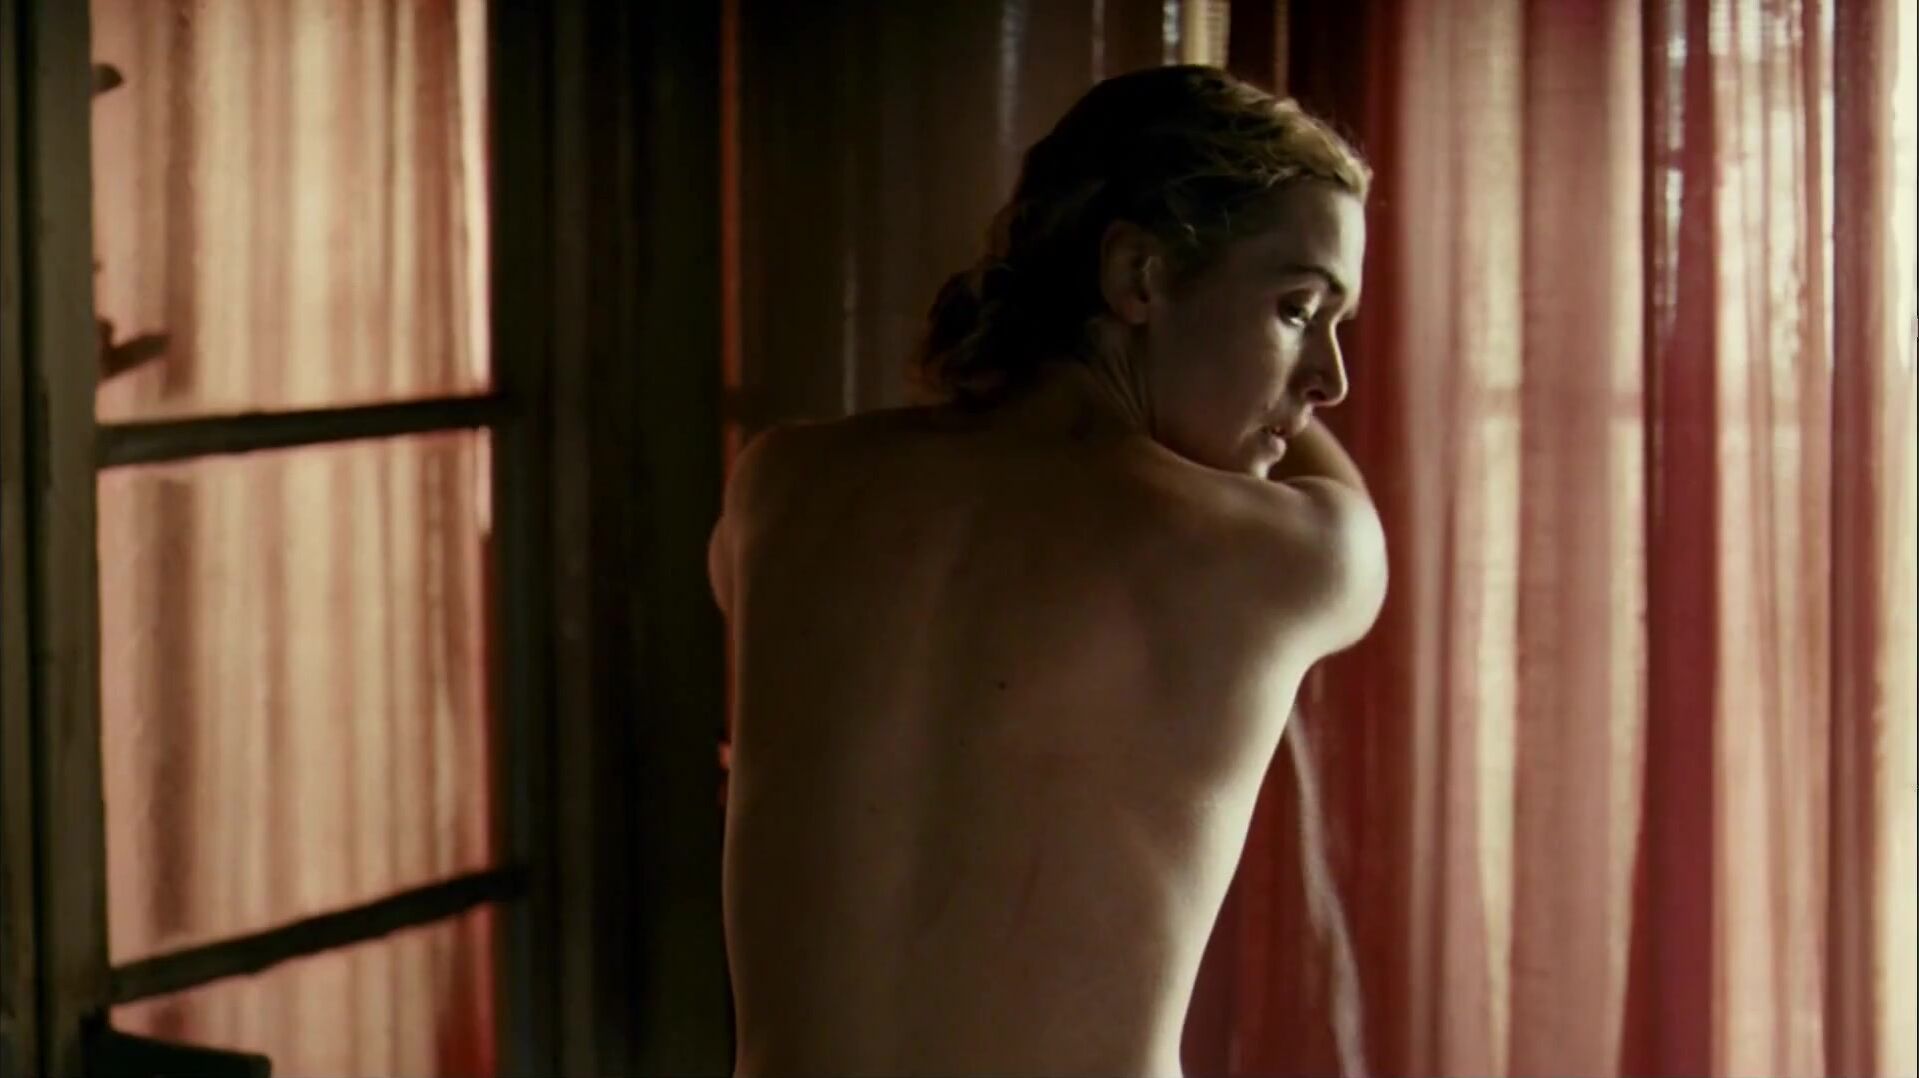 BadJoJo Hot movie performer Kate Winslet receives younger guy's cock in snatch in The Reader Dress